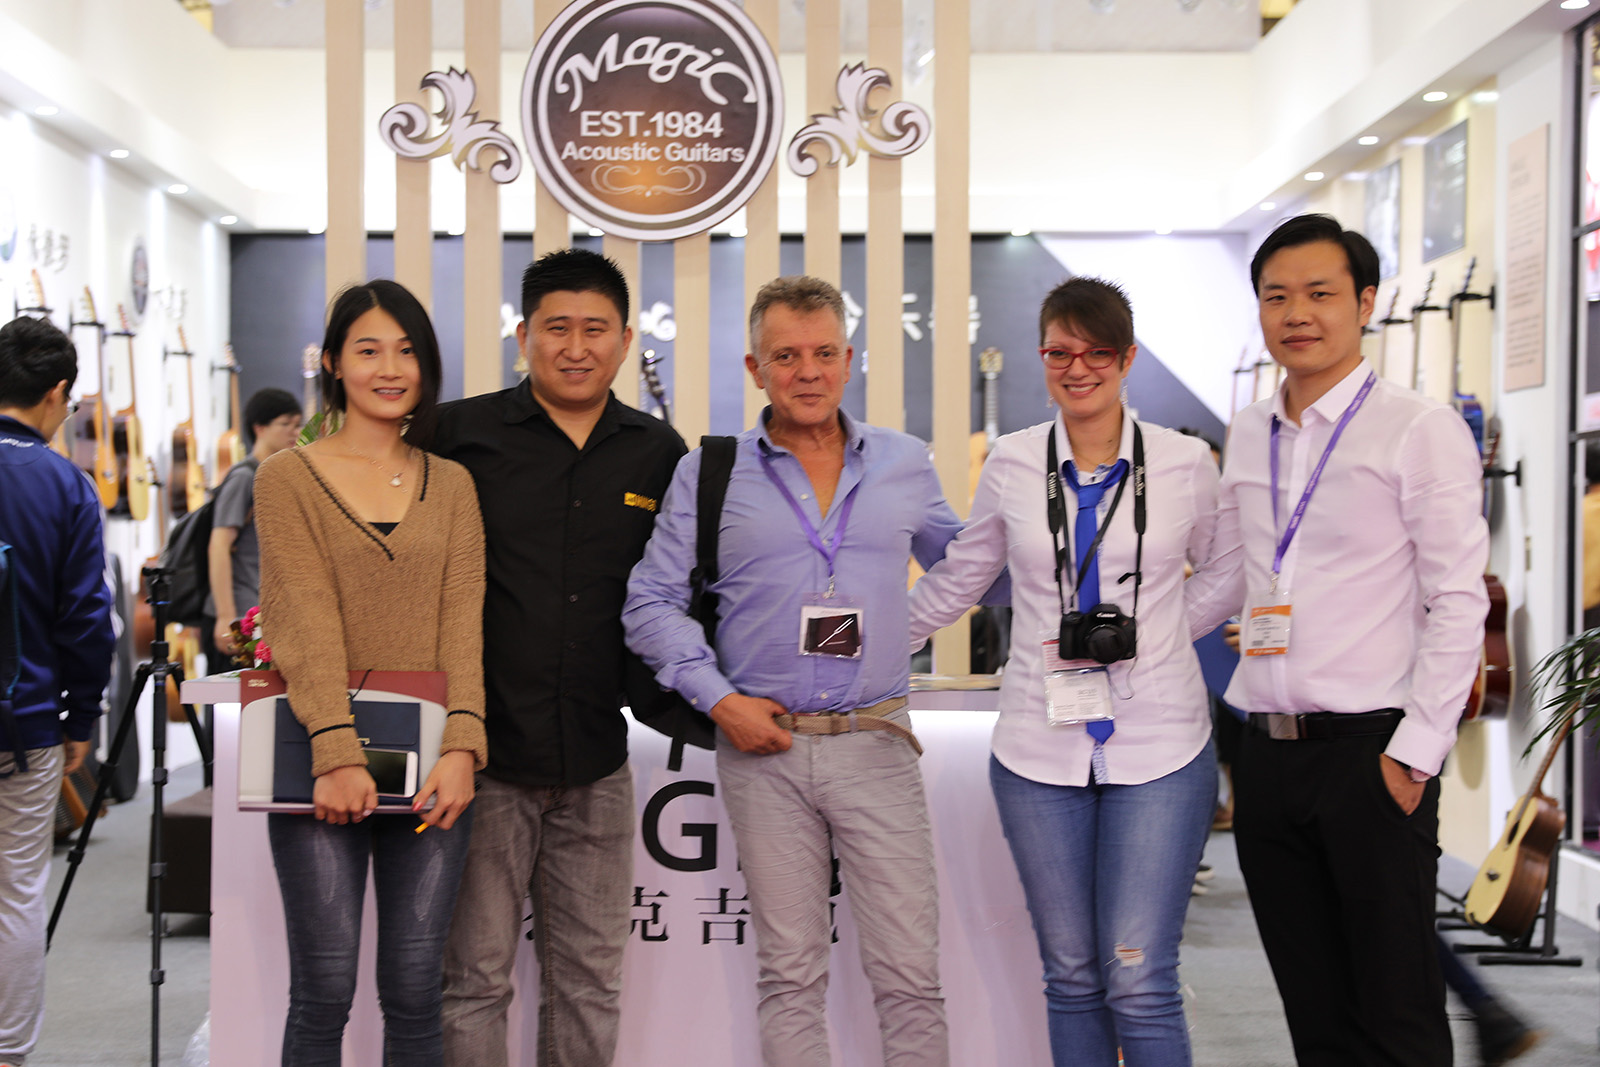 【Highlights in Music China 】Celebrities Gathered in Magic Guitars’ Booth